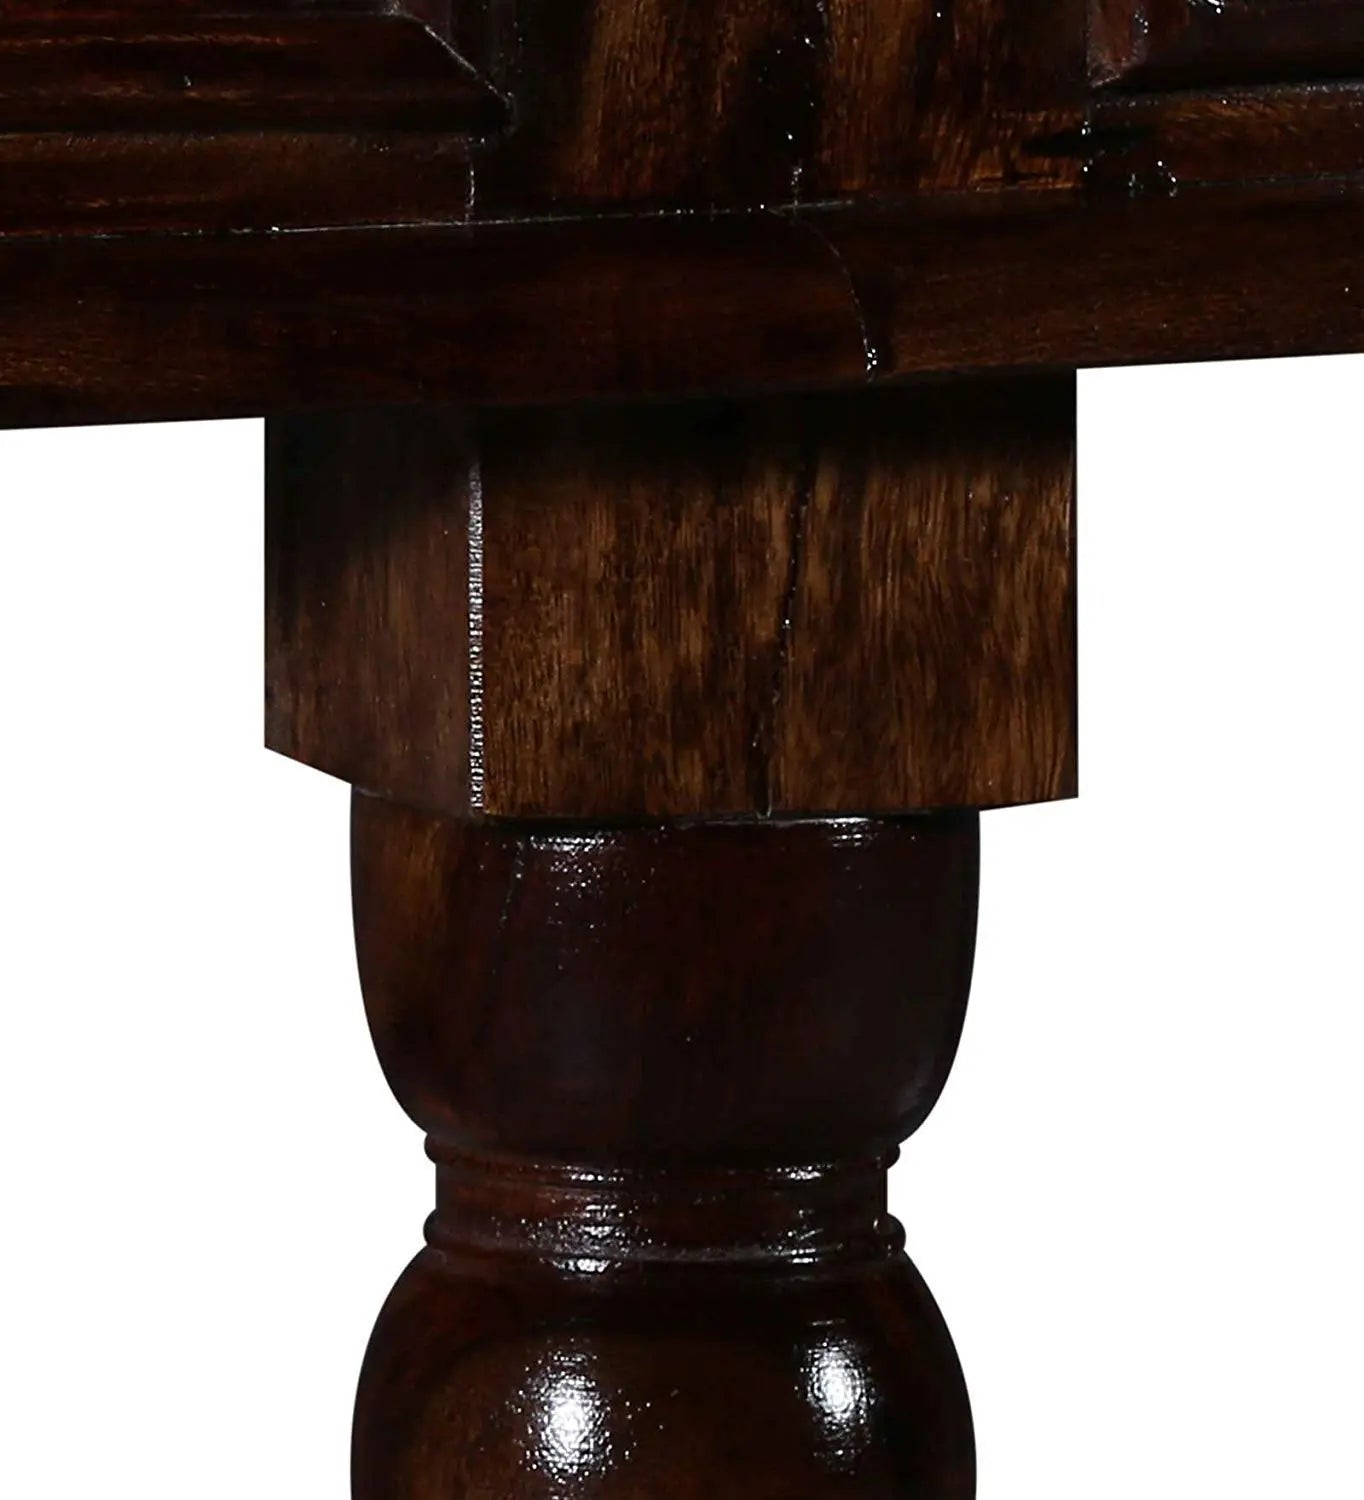 Console Table Ibex- Sheesham Wood Half Round Console Table for Living Room | Wooden Side Table | Honey Finish Furneez